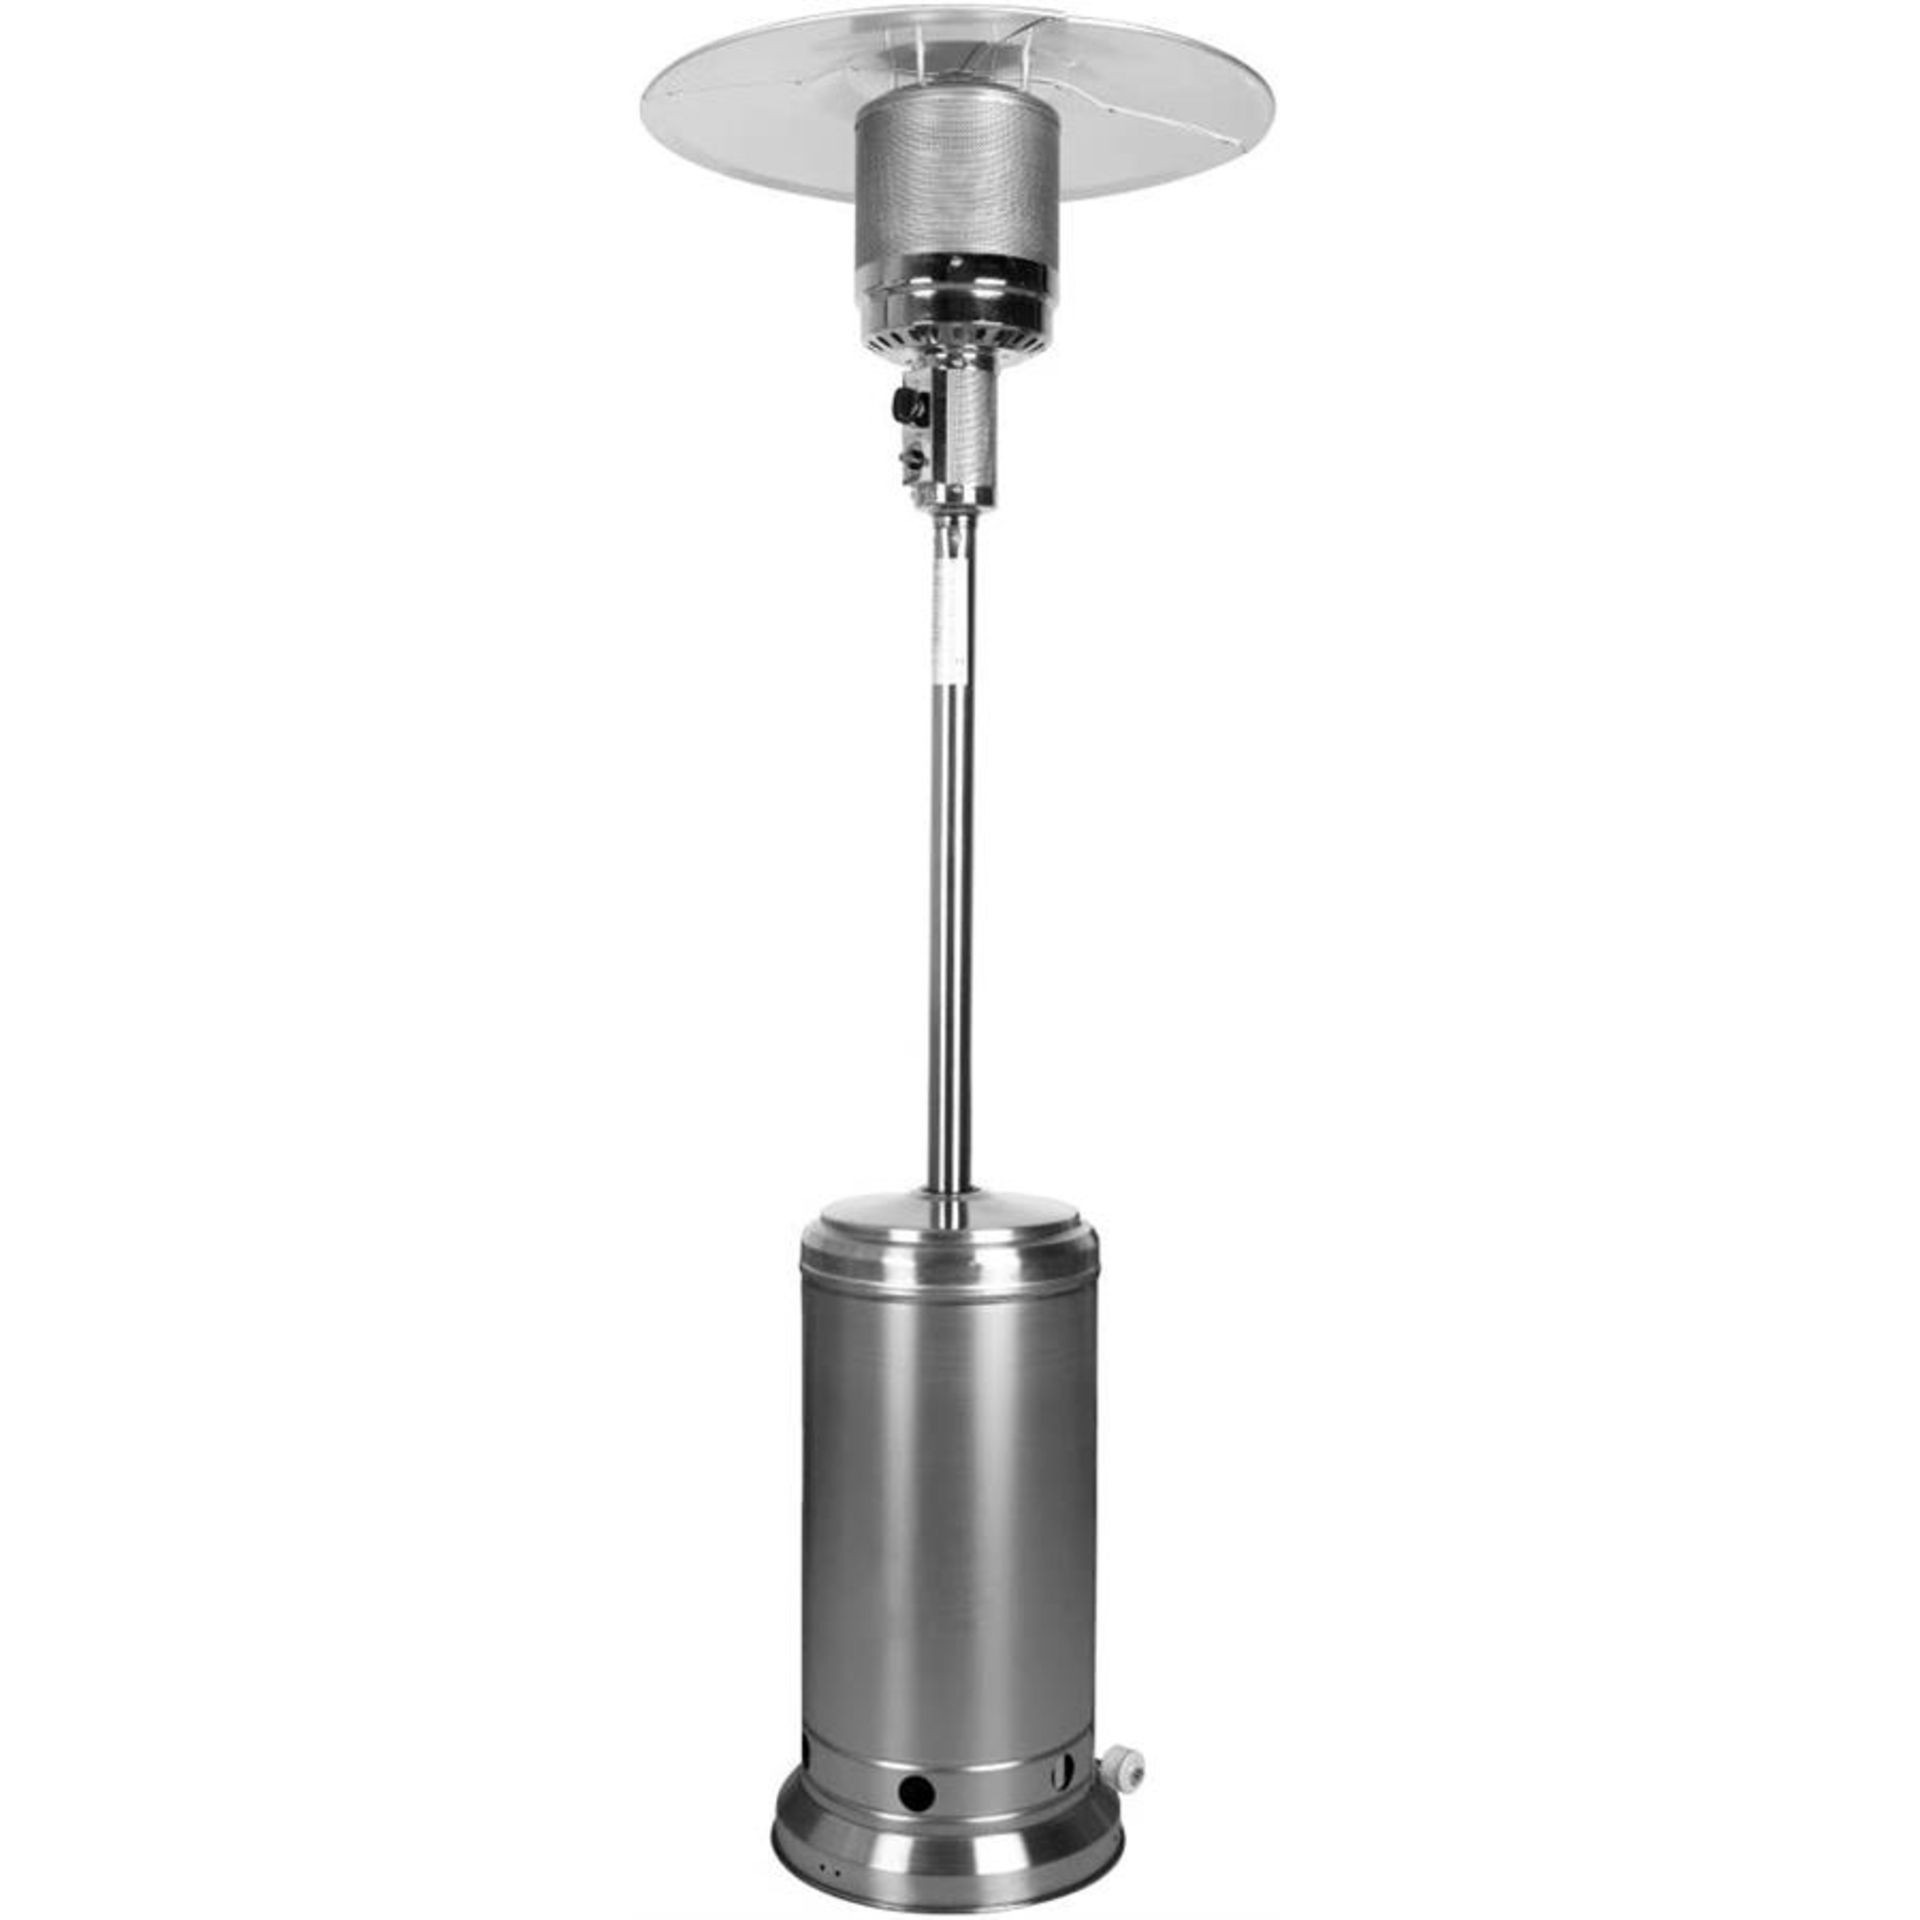 + VAT Brand New Chelsea Garden Company Garden Patio Heater With Cover - Item Is Available From